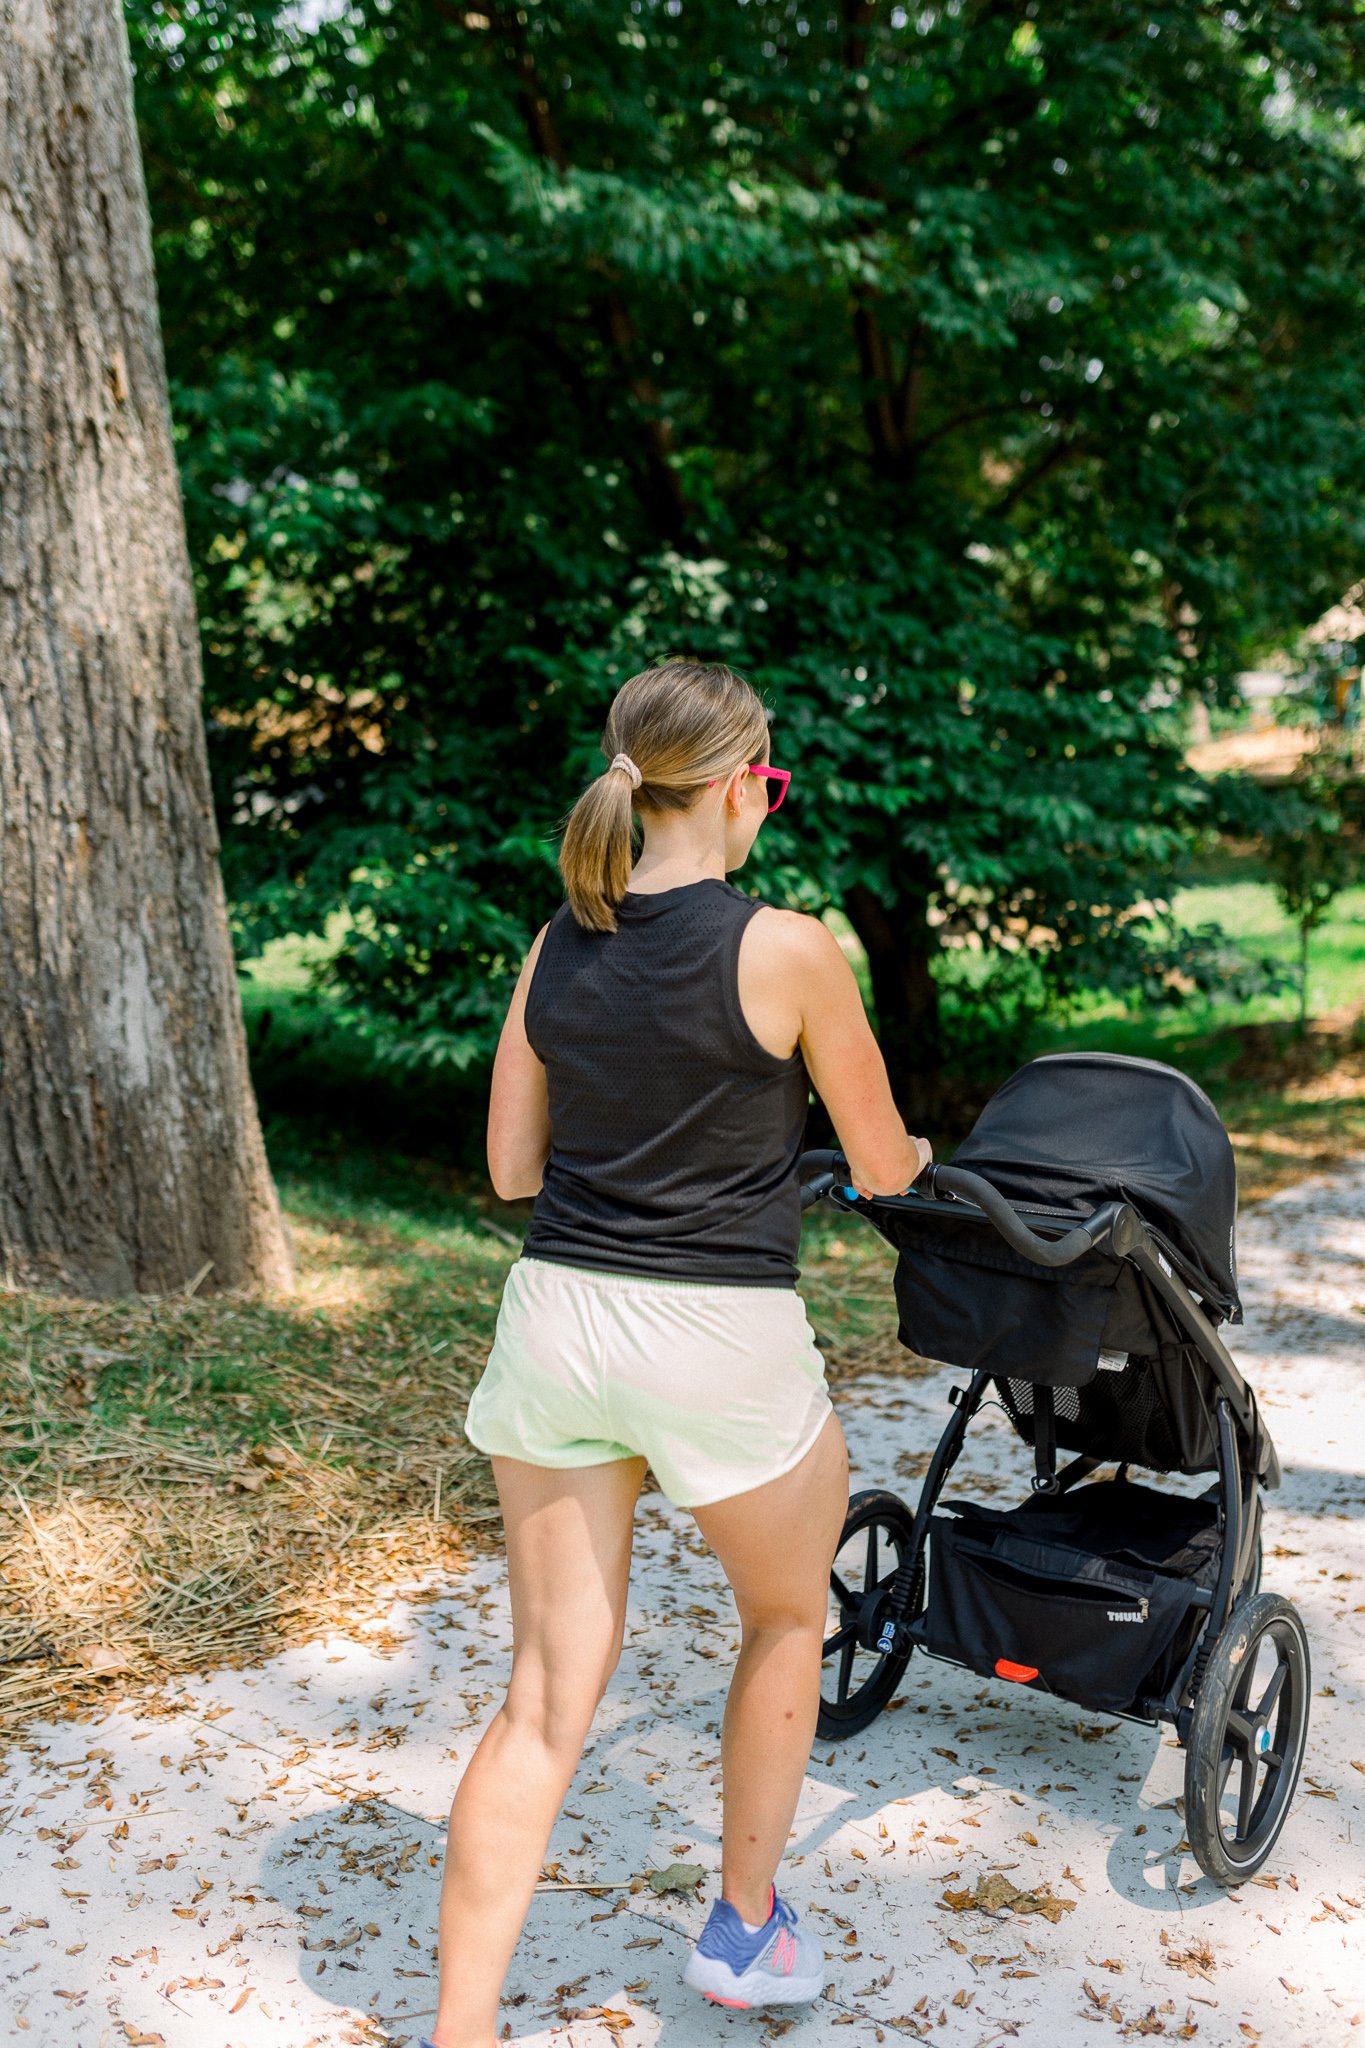 Jogging stroller with baby